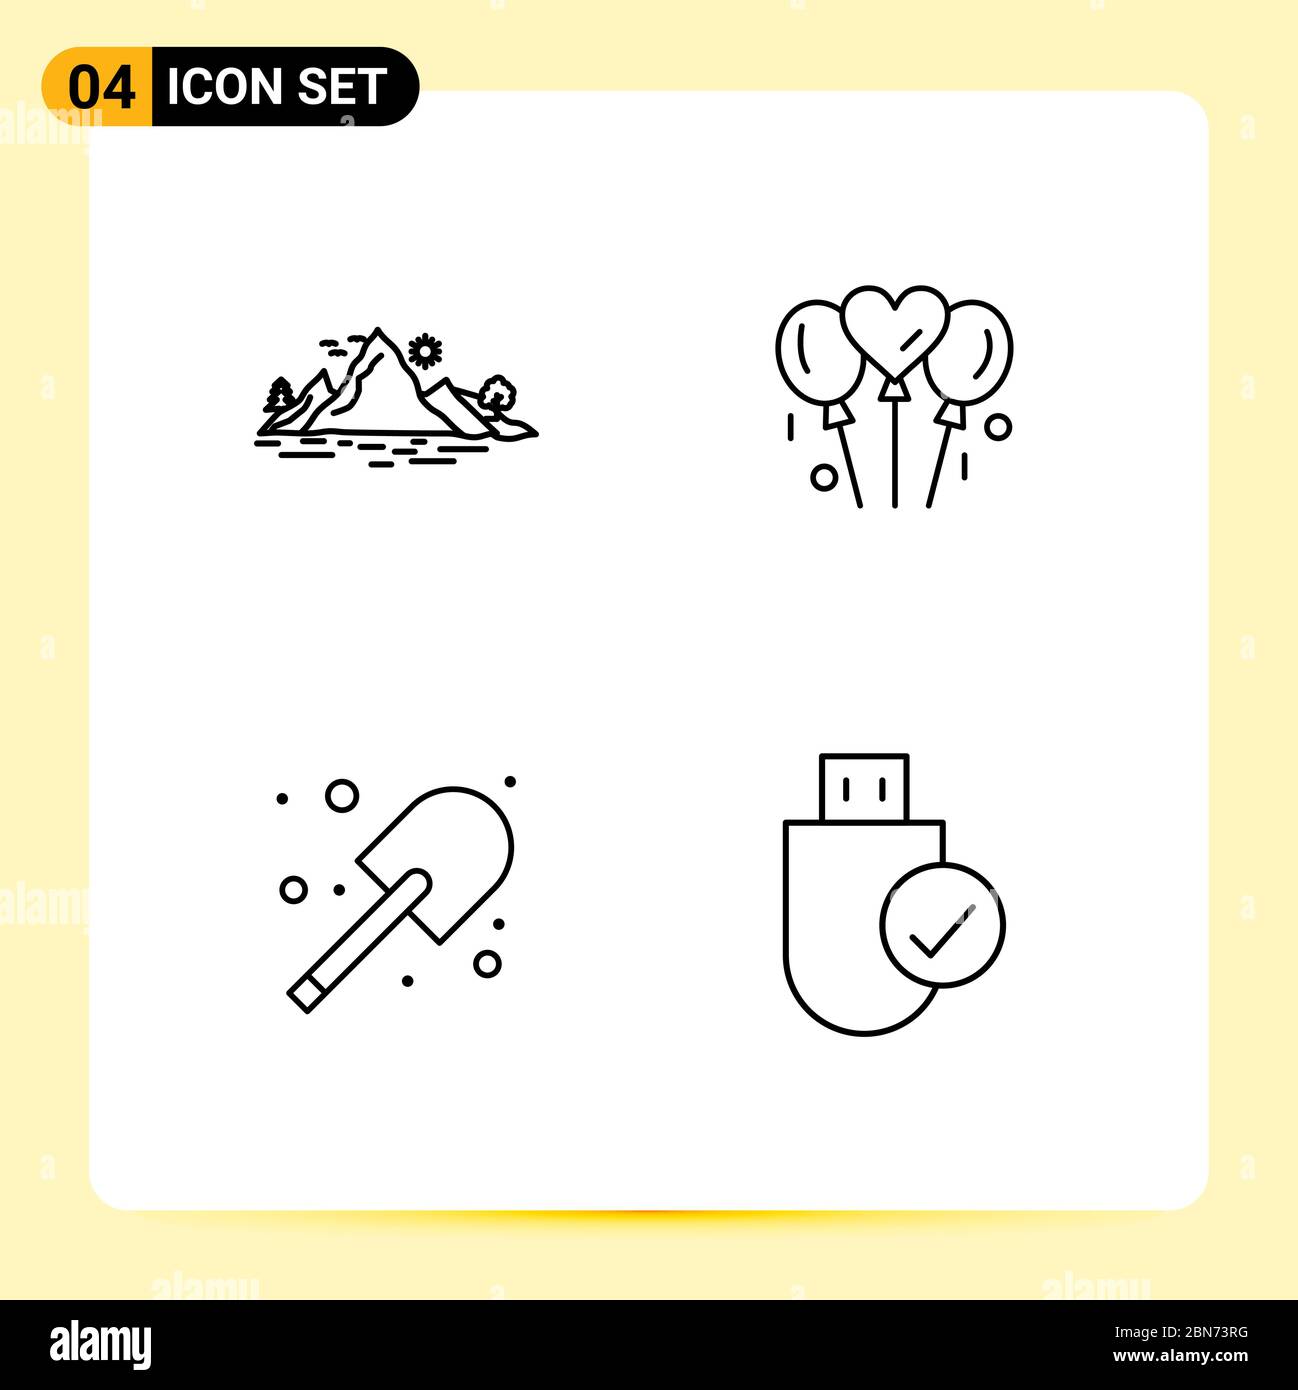 Universal Icon Symbols Group of 4 Modern Filledline Flat Colors of nature, digging, mountain, love, garden Editable Vector Design Elements Stock Vector